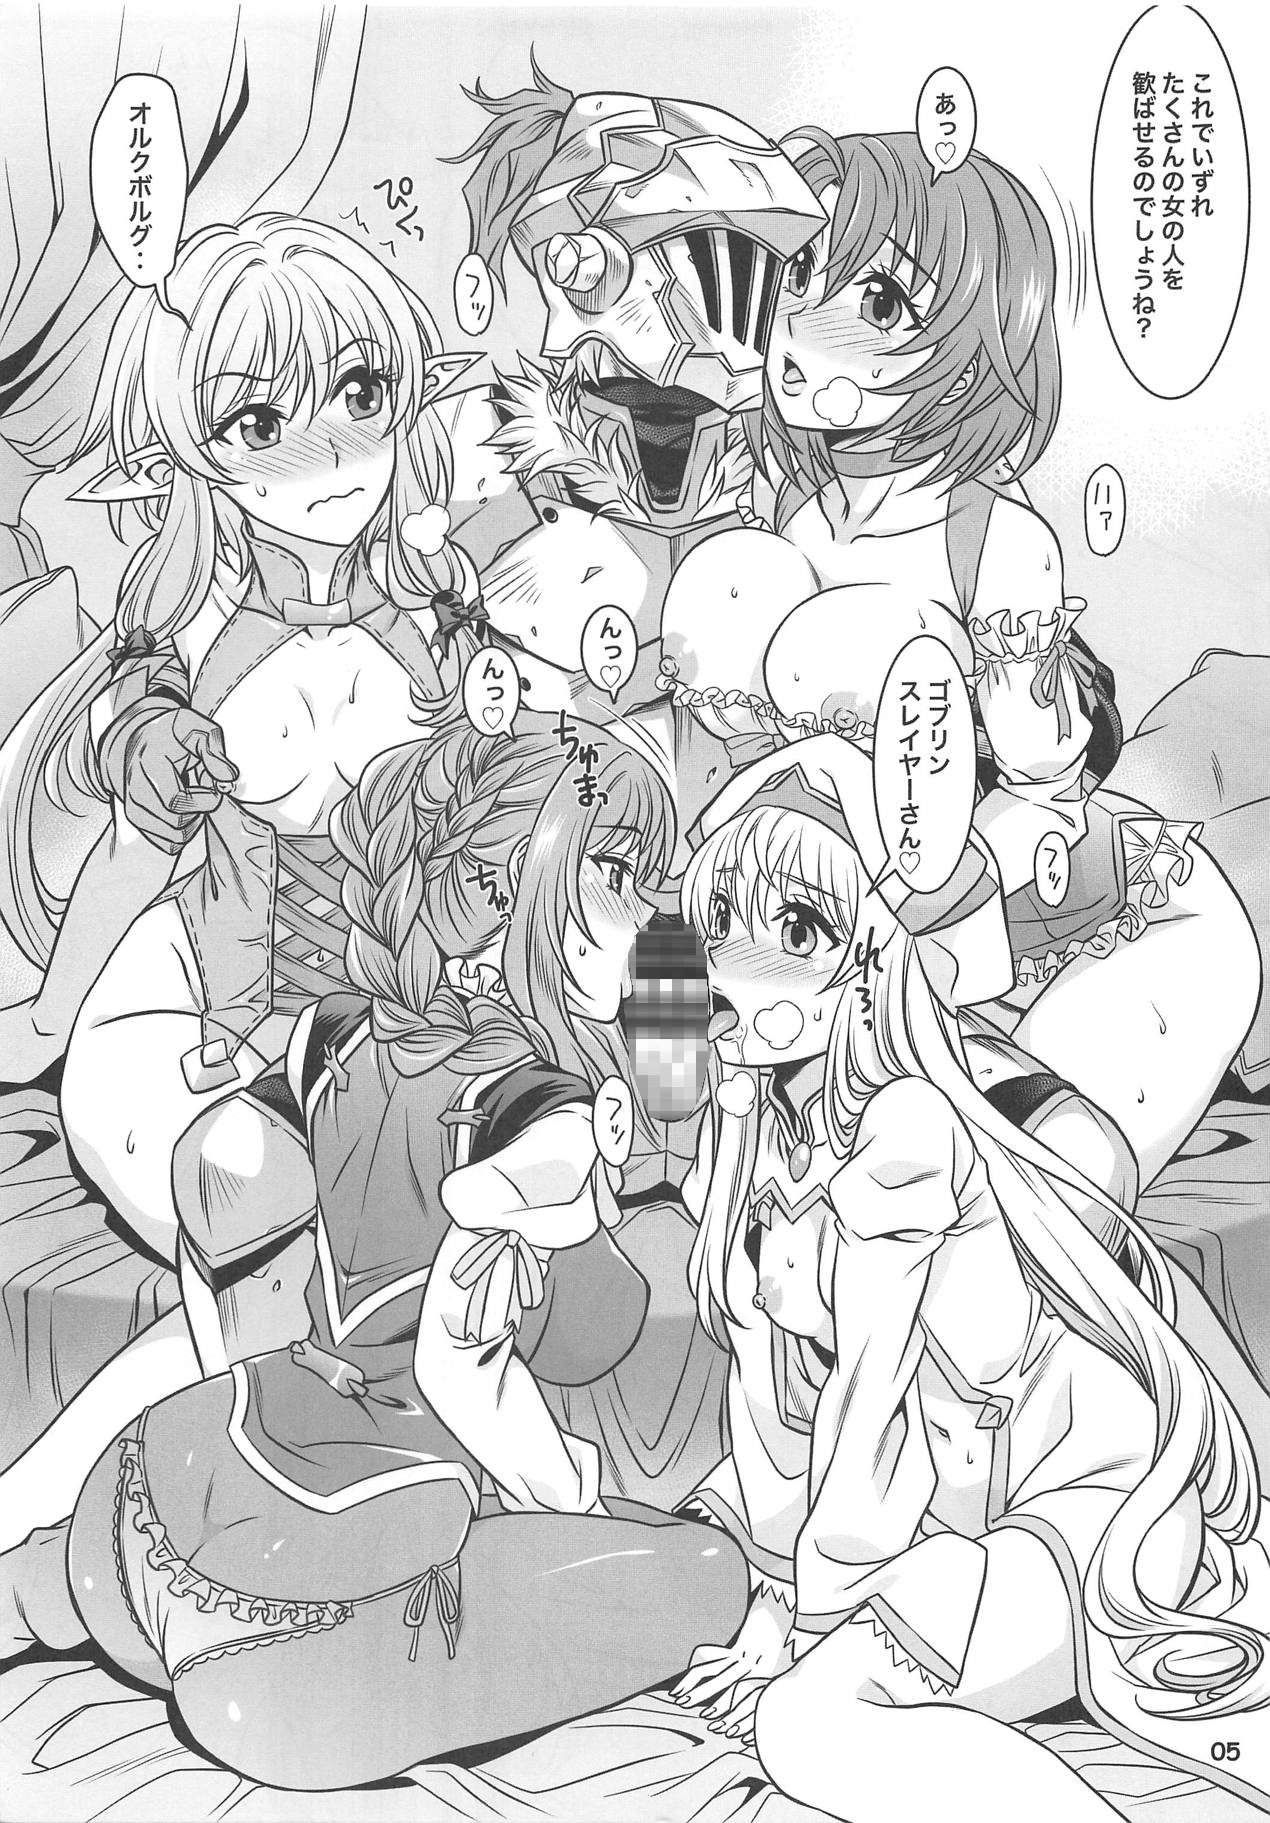 It is requested by pretty, naughty girls, and it is happy and it seems not to be able to live long. The harem image ♡ 3